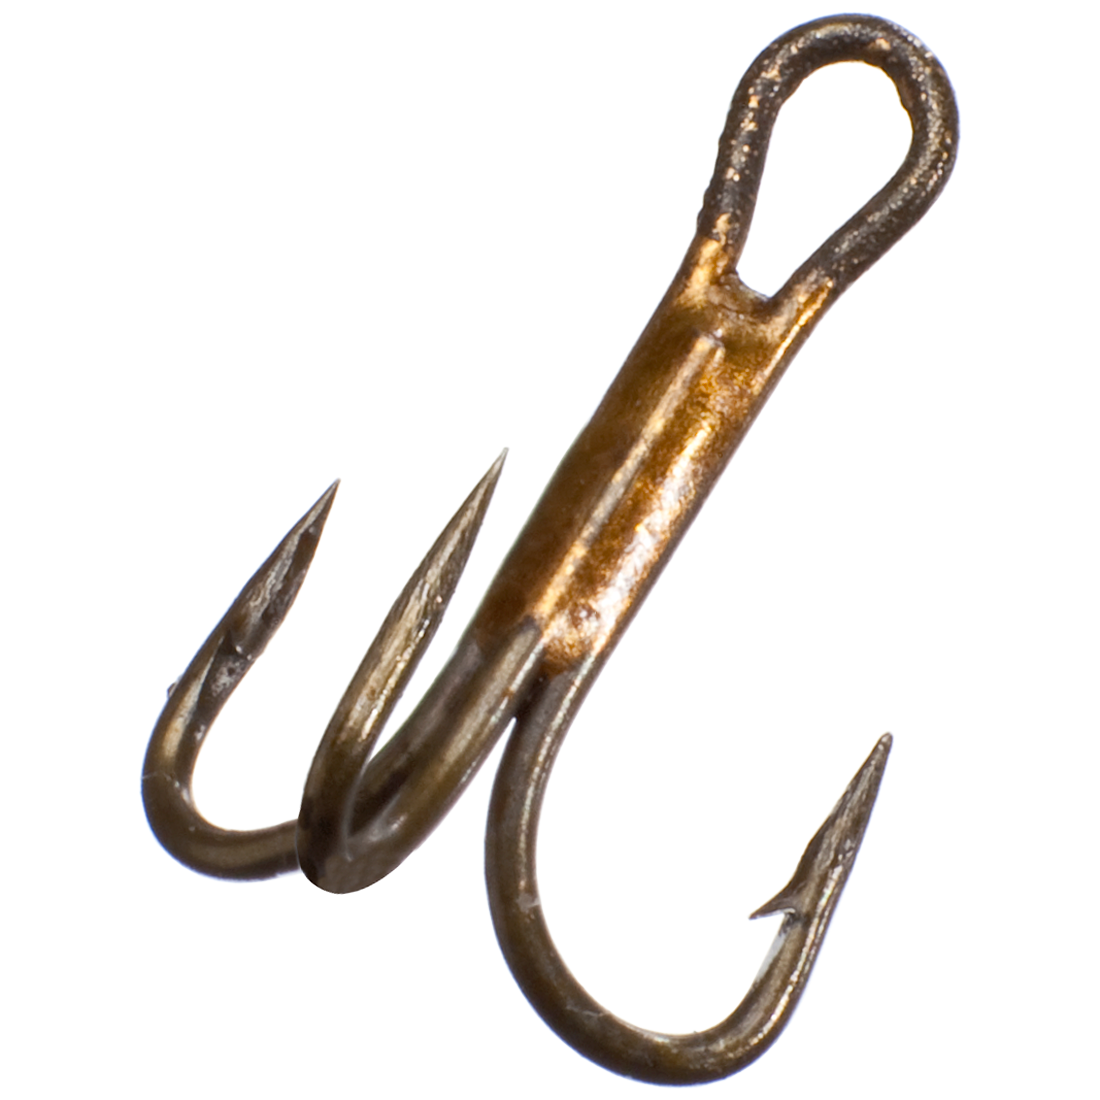 Eagle Claw Lazer 2x Strong Curved Point Treble Hook - 16